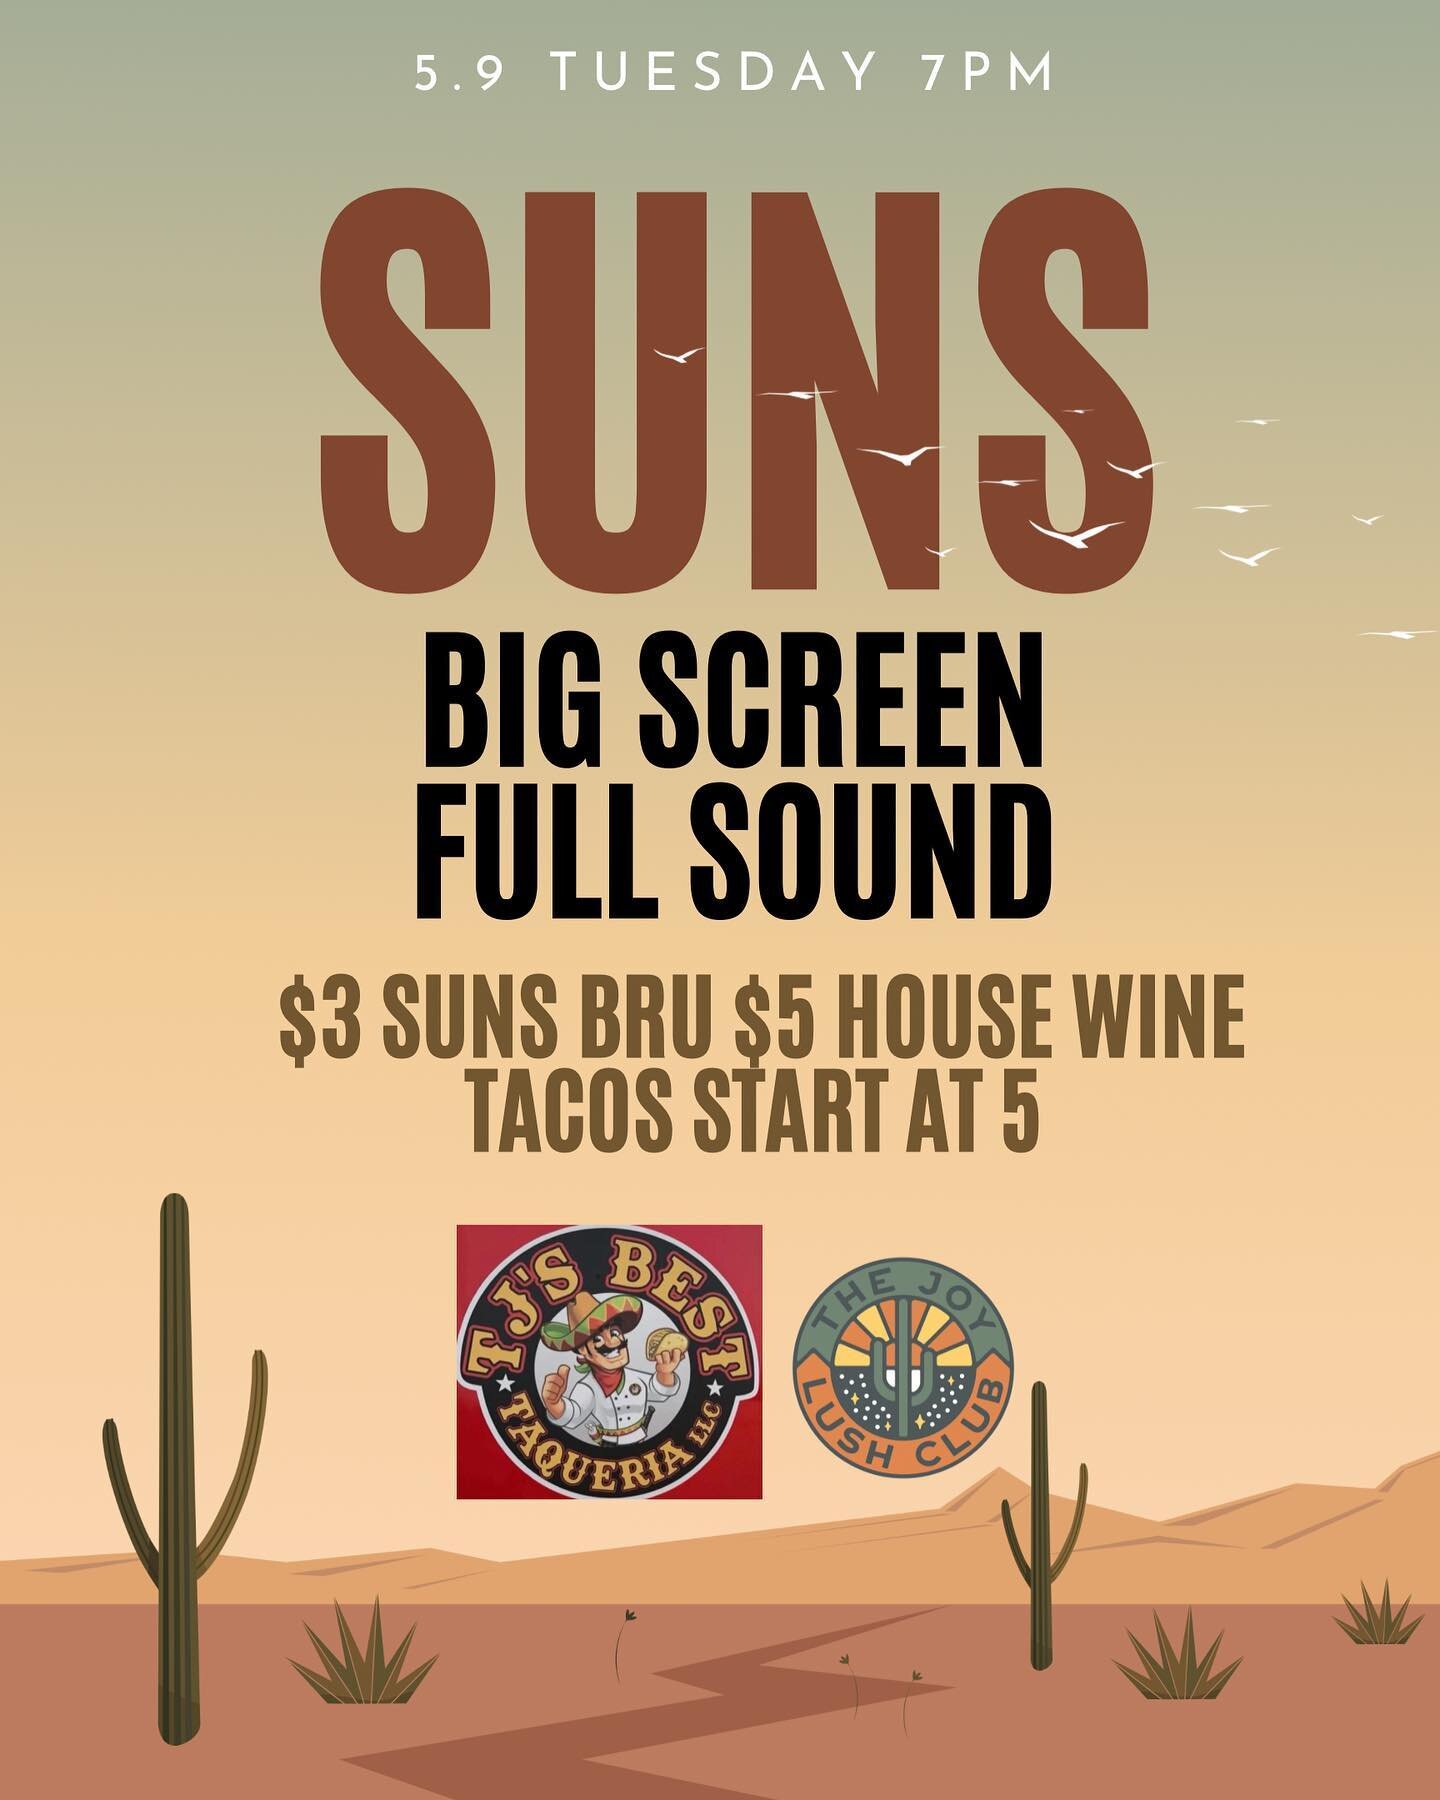 HUGE win yesterday! Come cheer on the boys this Tuesday with us&mdash; tacos start at 5 and great drink specials all night!